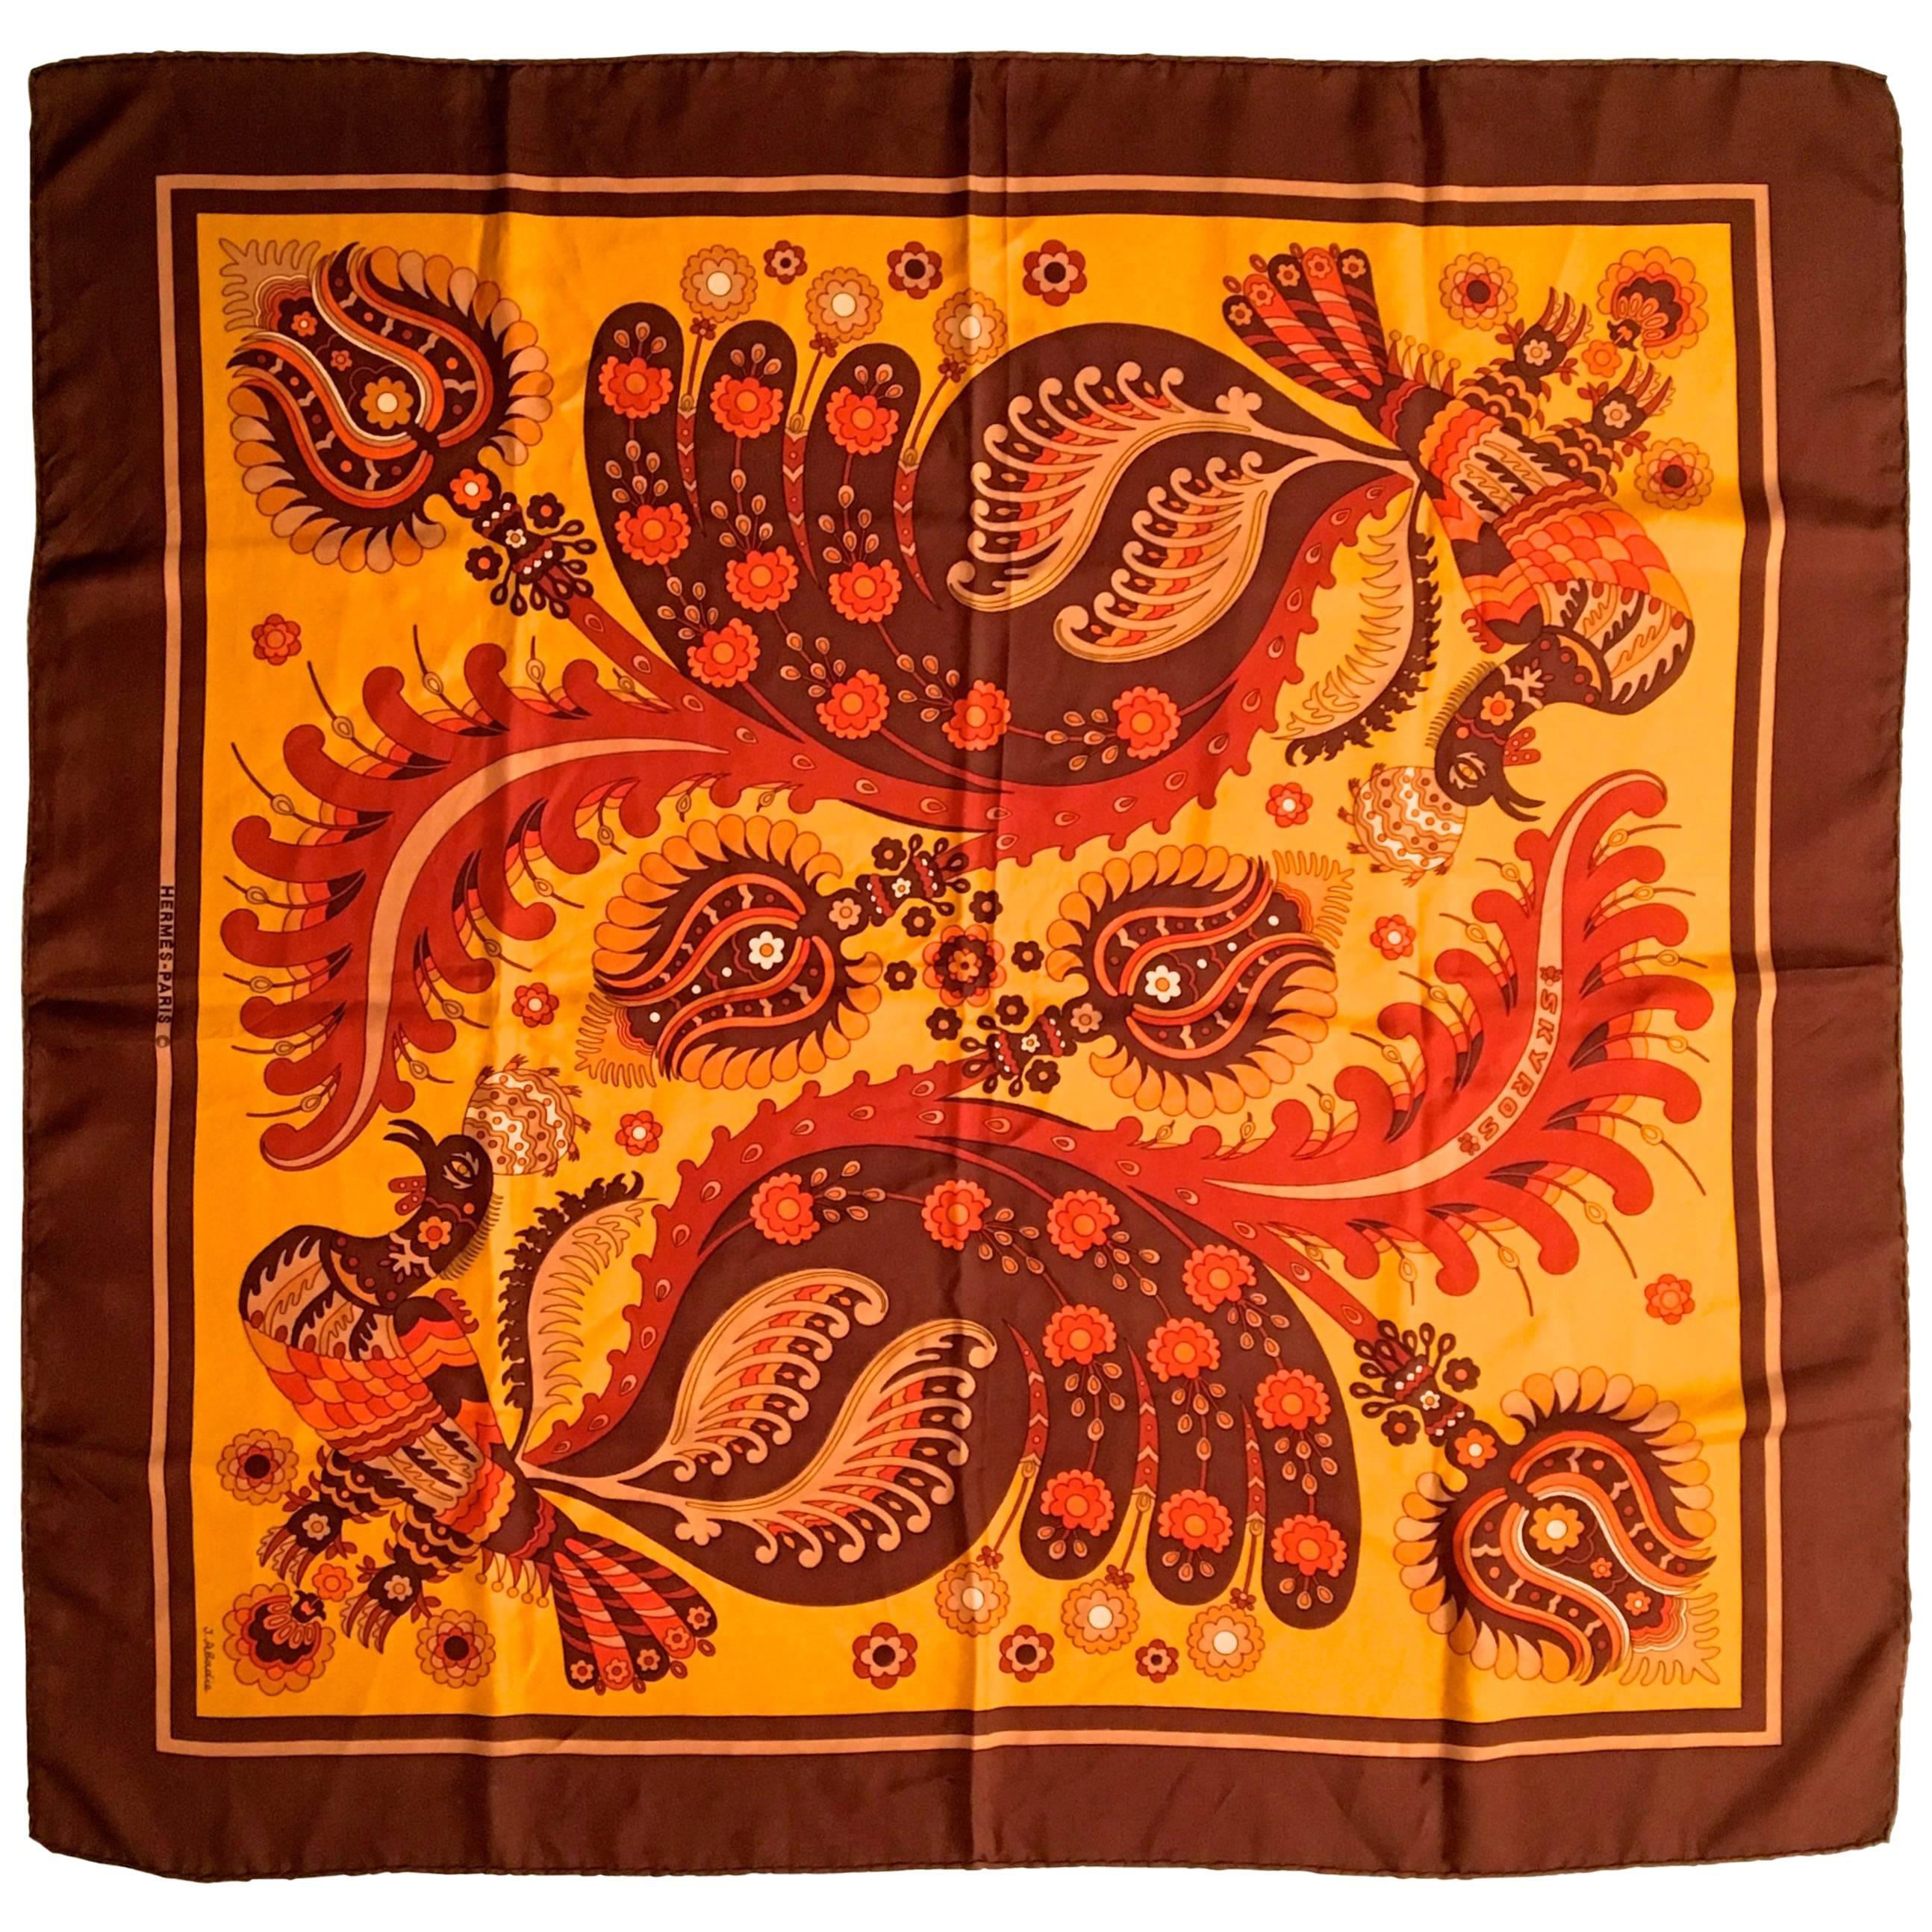 Rare Hermes Scarf - 1971 - Julia Abadie - Skyros - Excellent Condition For Sale